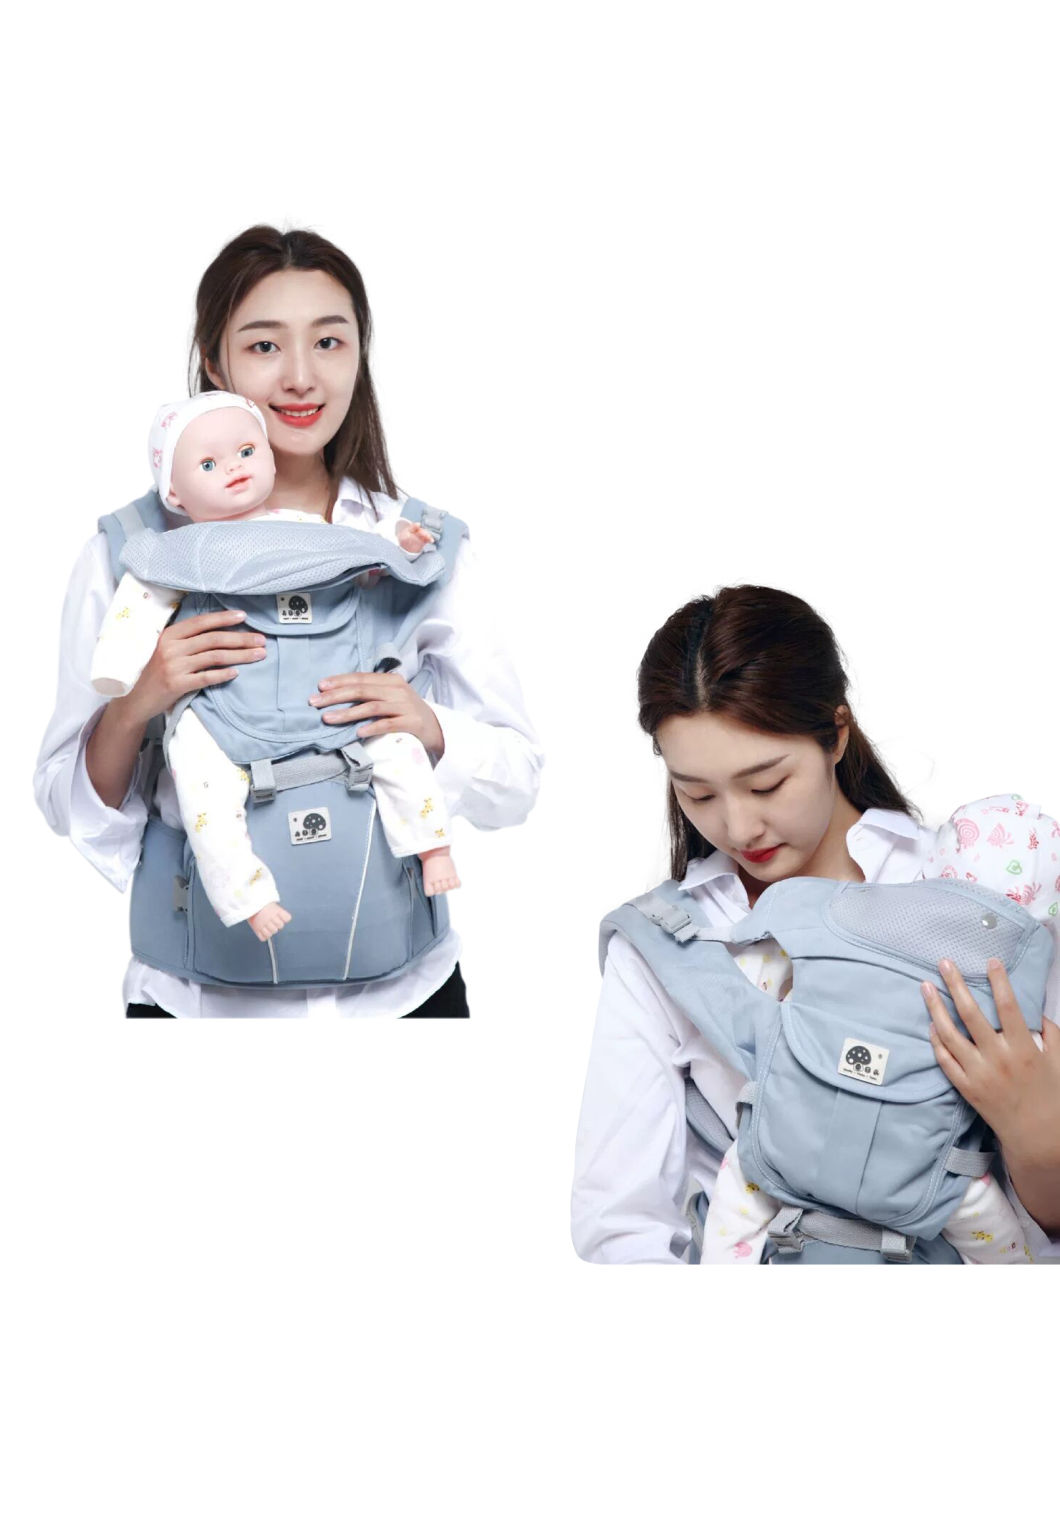 The New 2021 Xgt Stretchy Breathable Baby Holder Carrier for Newborn Infant Kid Newborn Baby Carrier